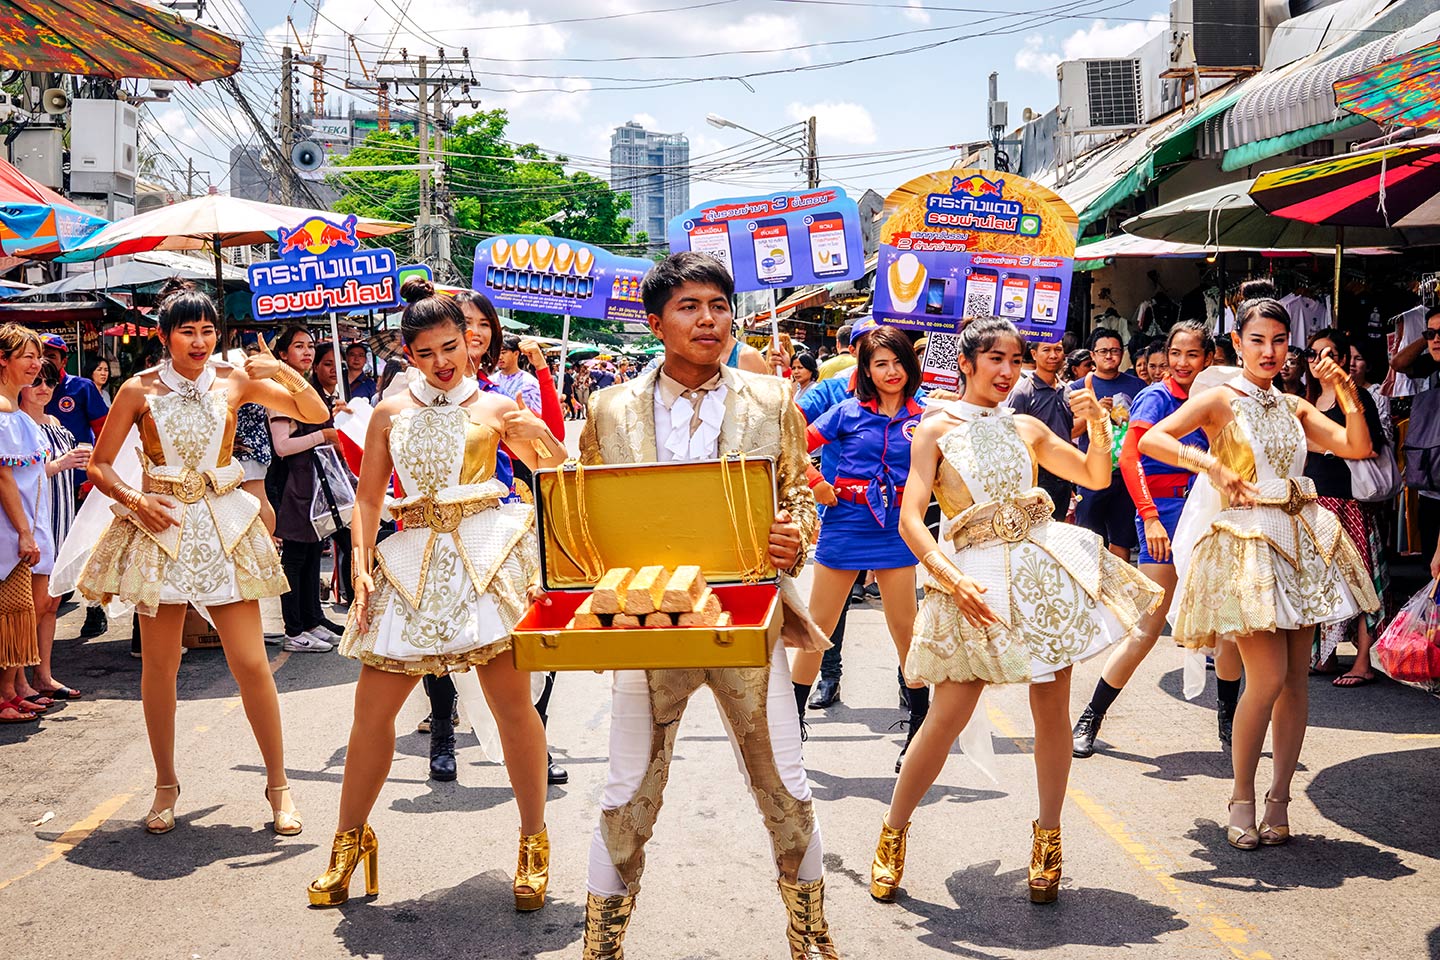 Red Bull promoters at Chatuchak Weekend Market in Bangkok